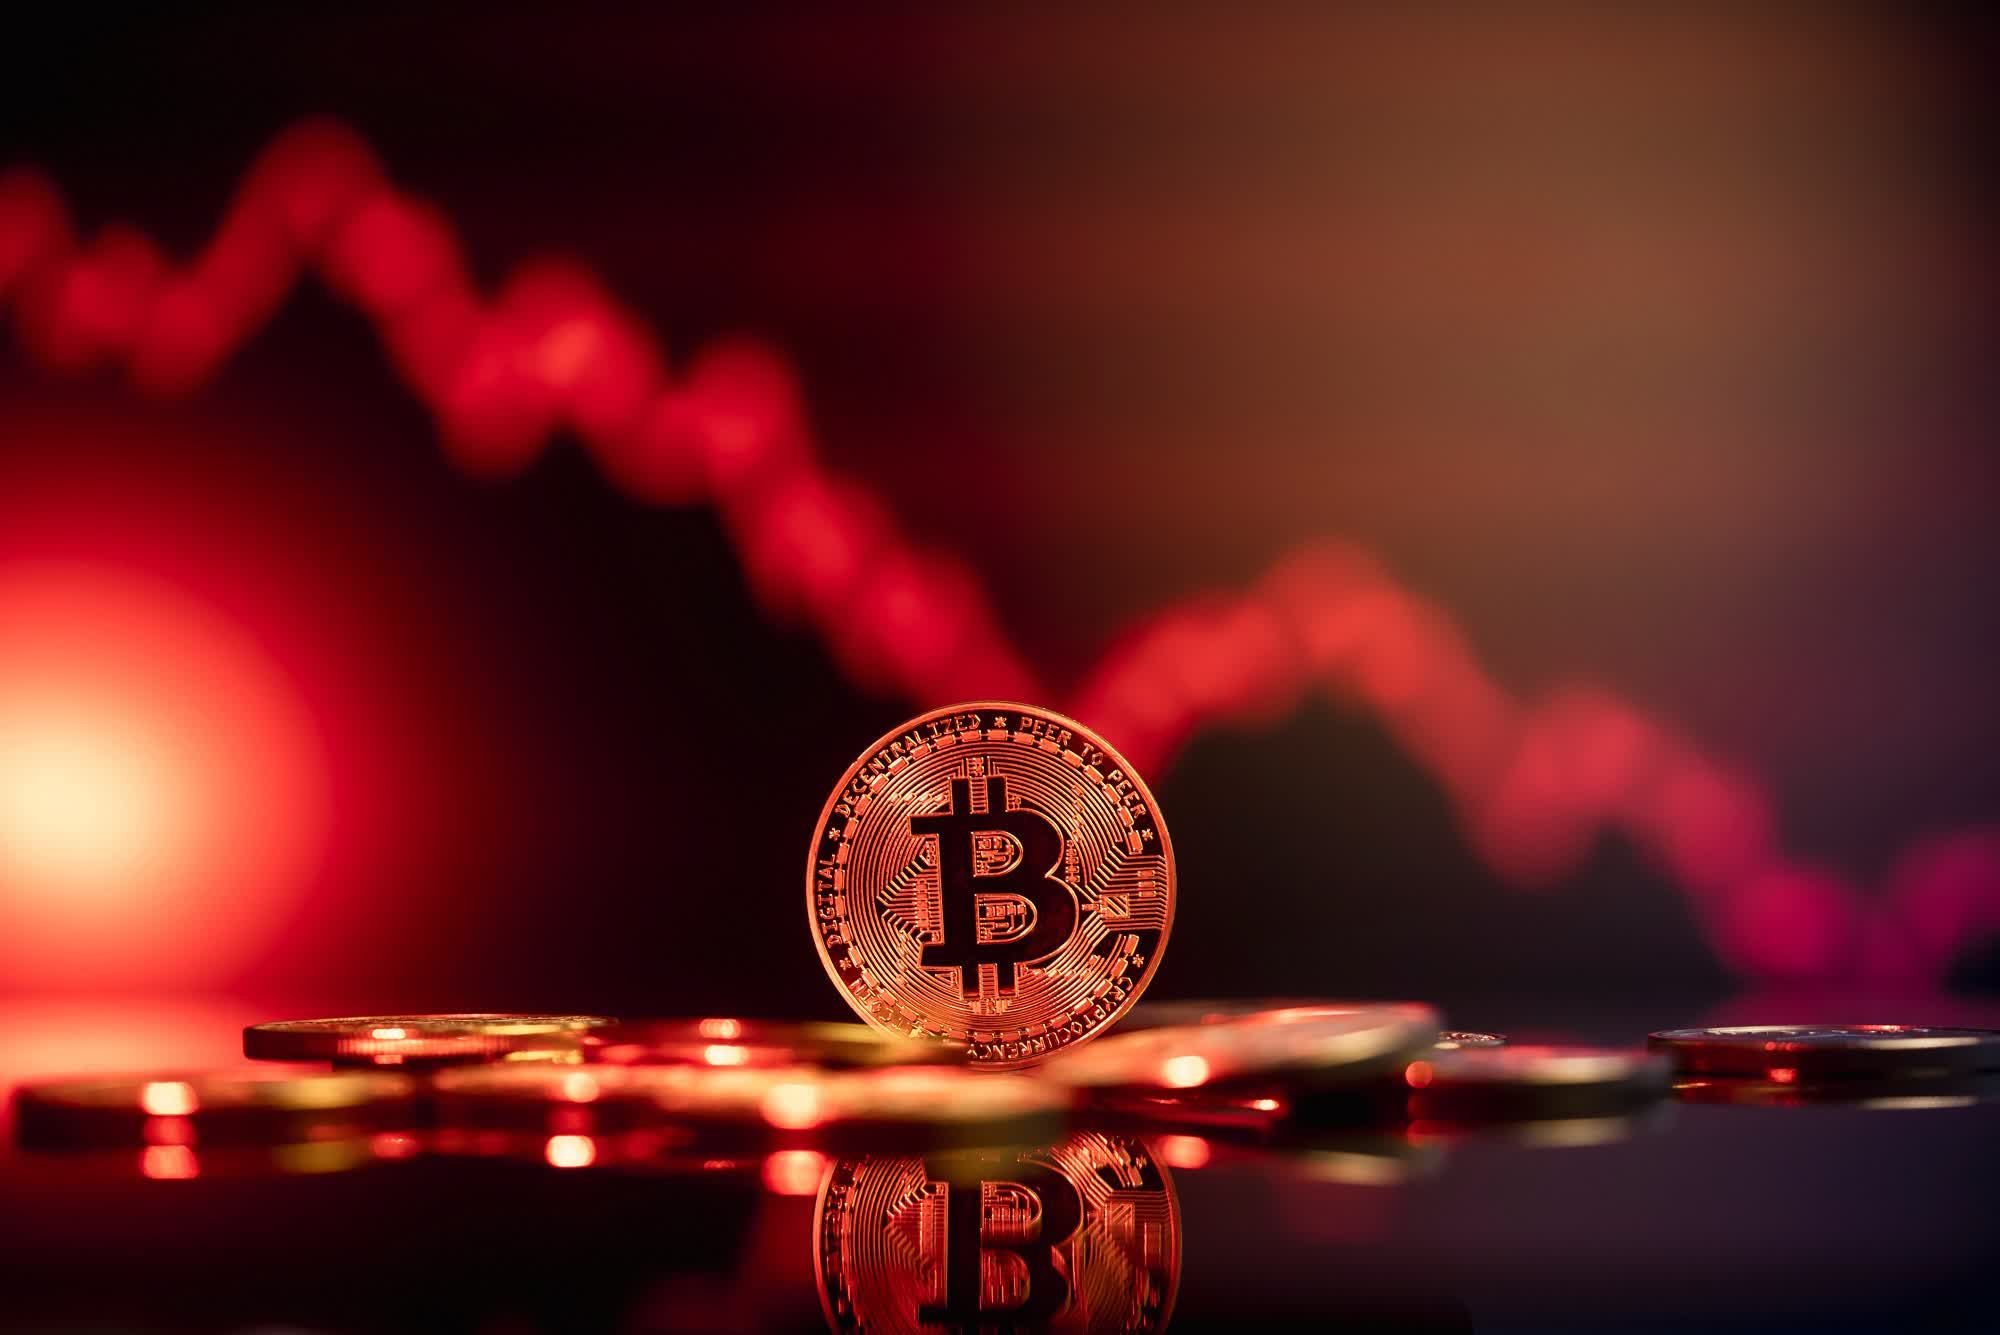 Bitcoin price predictions for 2023: rally to $250,000 or crash to $5,000